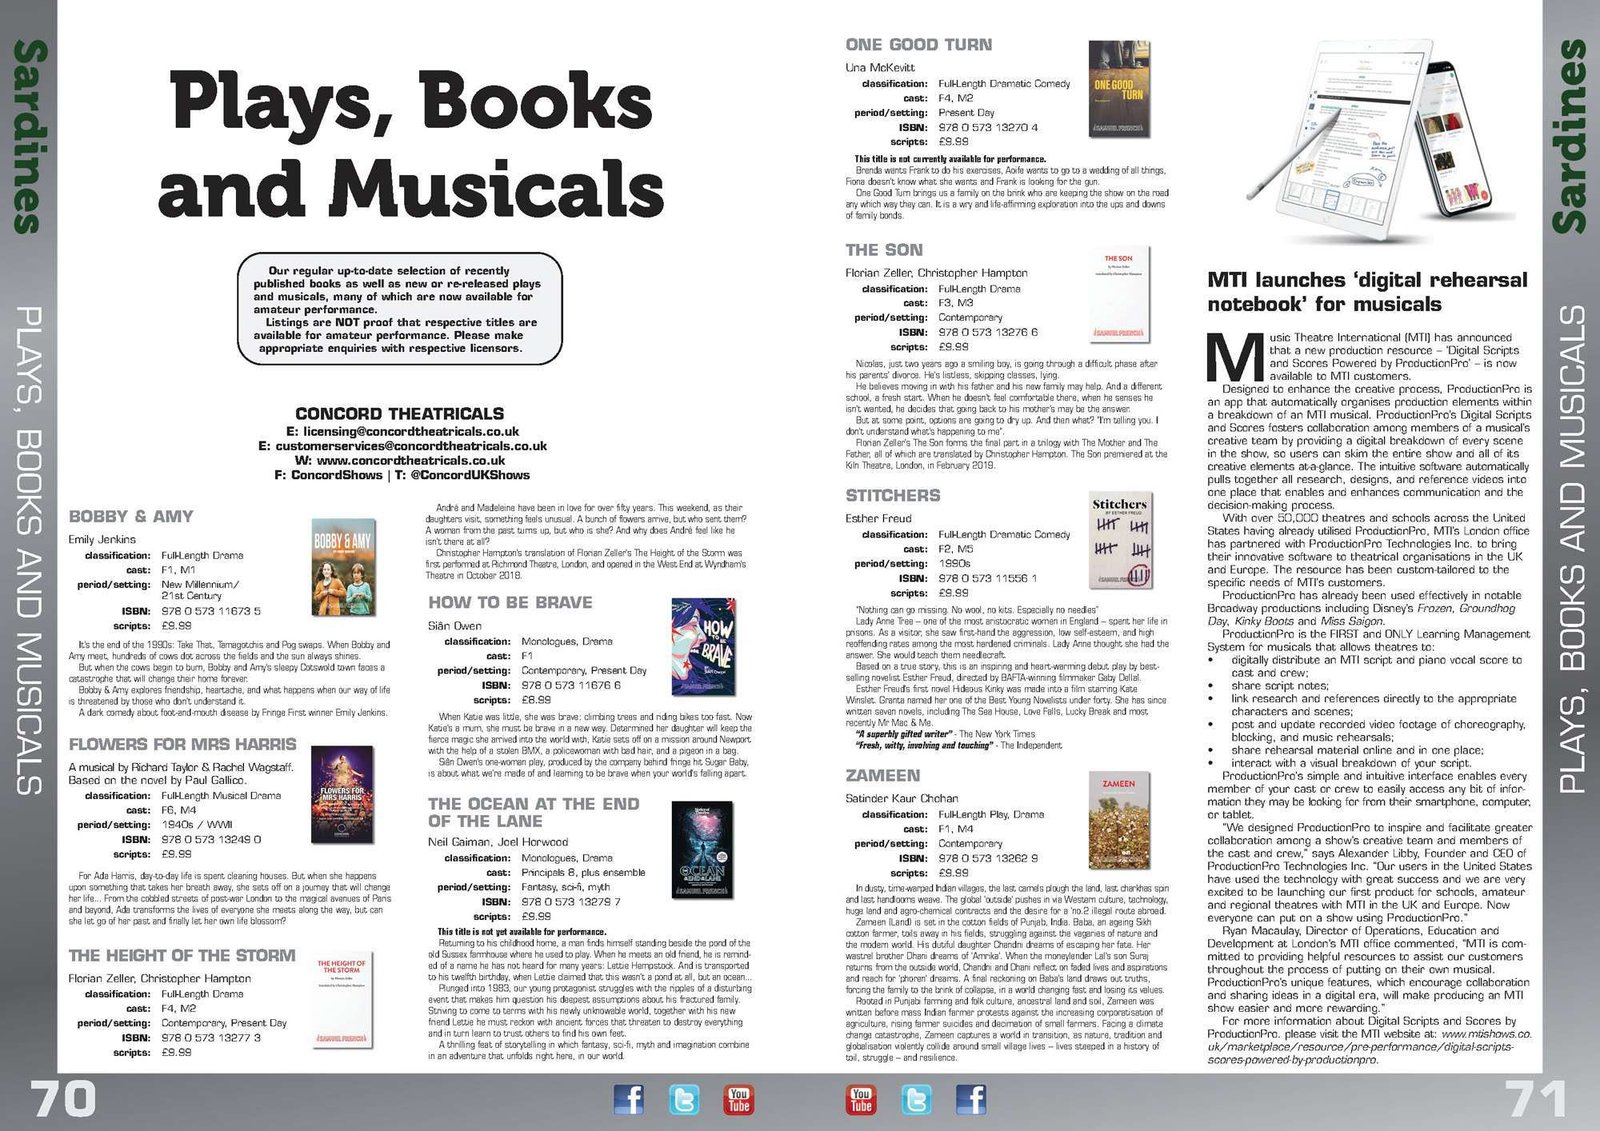 Plays, Books and Musicals